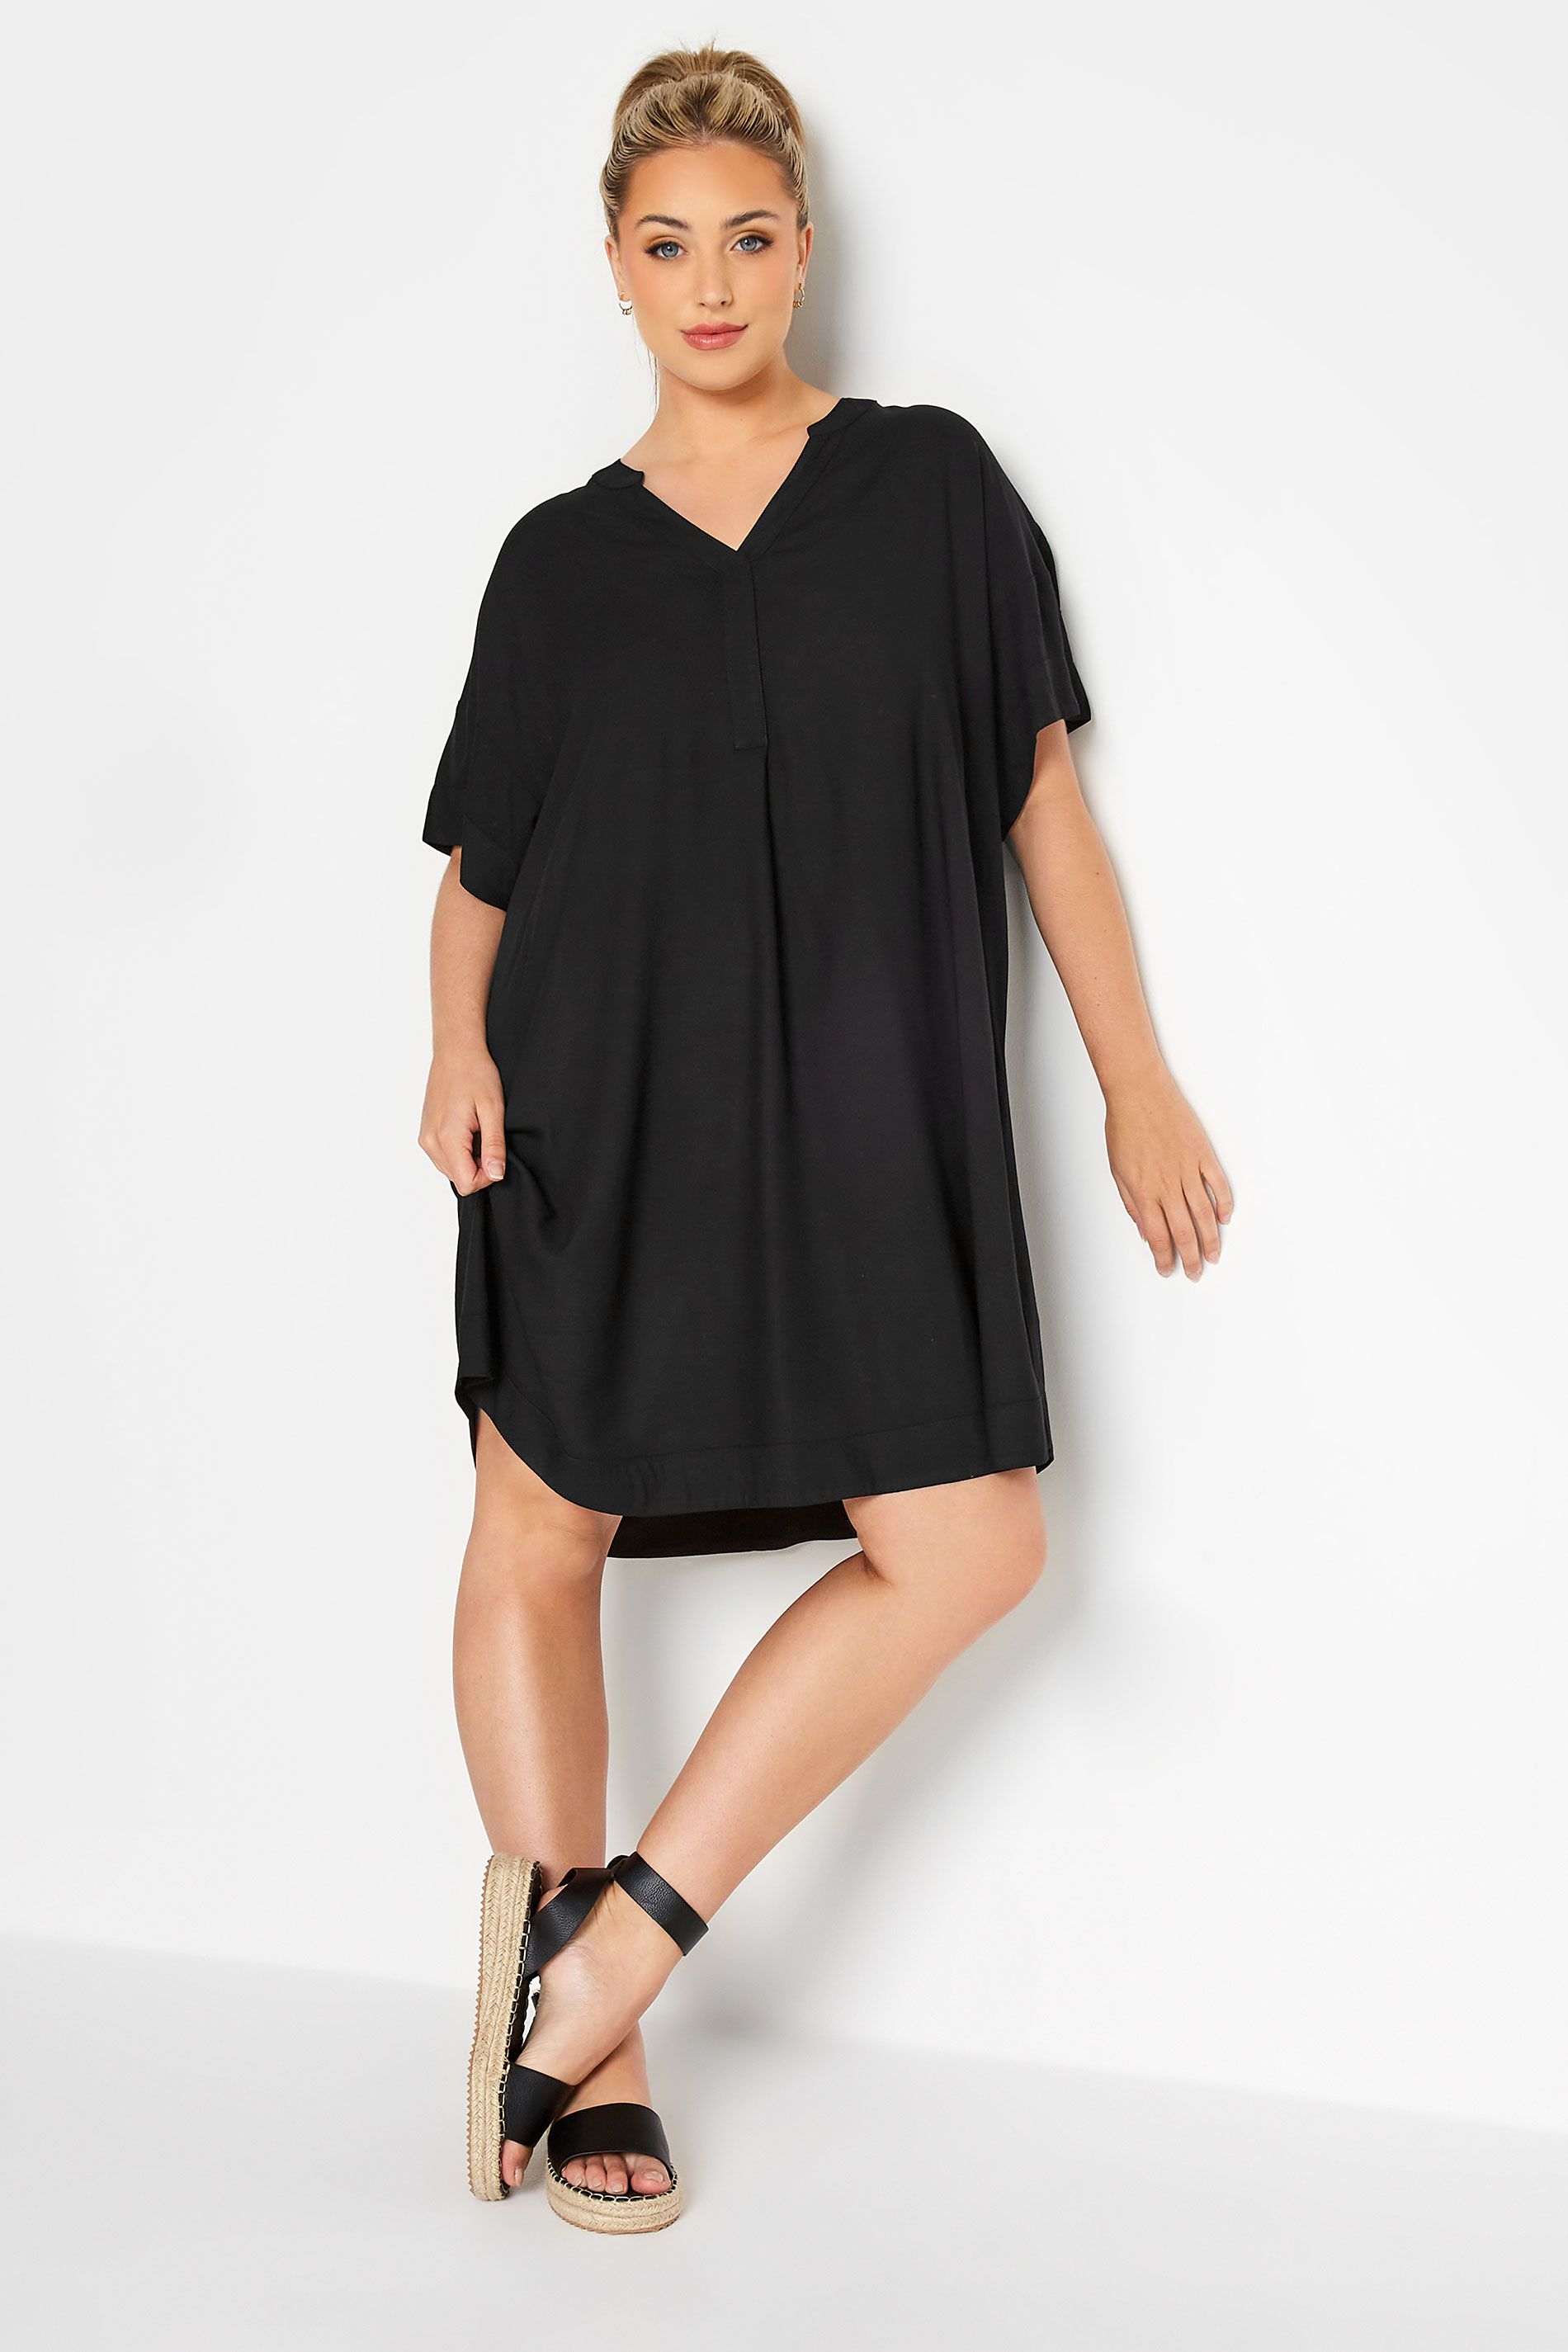 Robes Grande Taille Grande taille  Robes Casual | LIMITED COLLECTION - Robe Noire Style Chemisier - MU42677